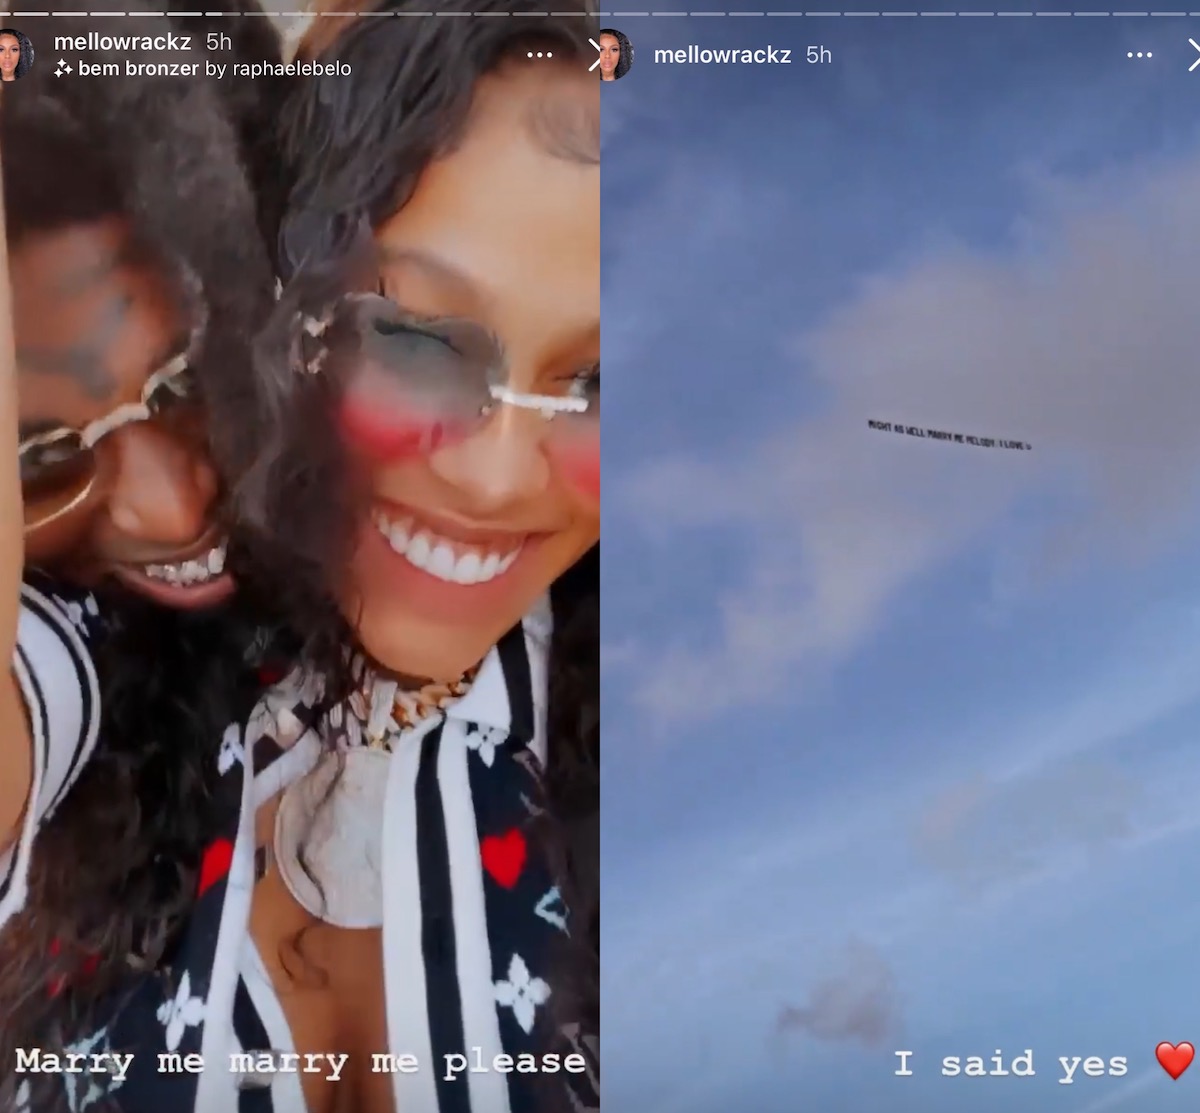 Kodak Black is now engaged to rapper Mellow Rackz  after lavish proposal  involving airplane